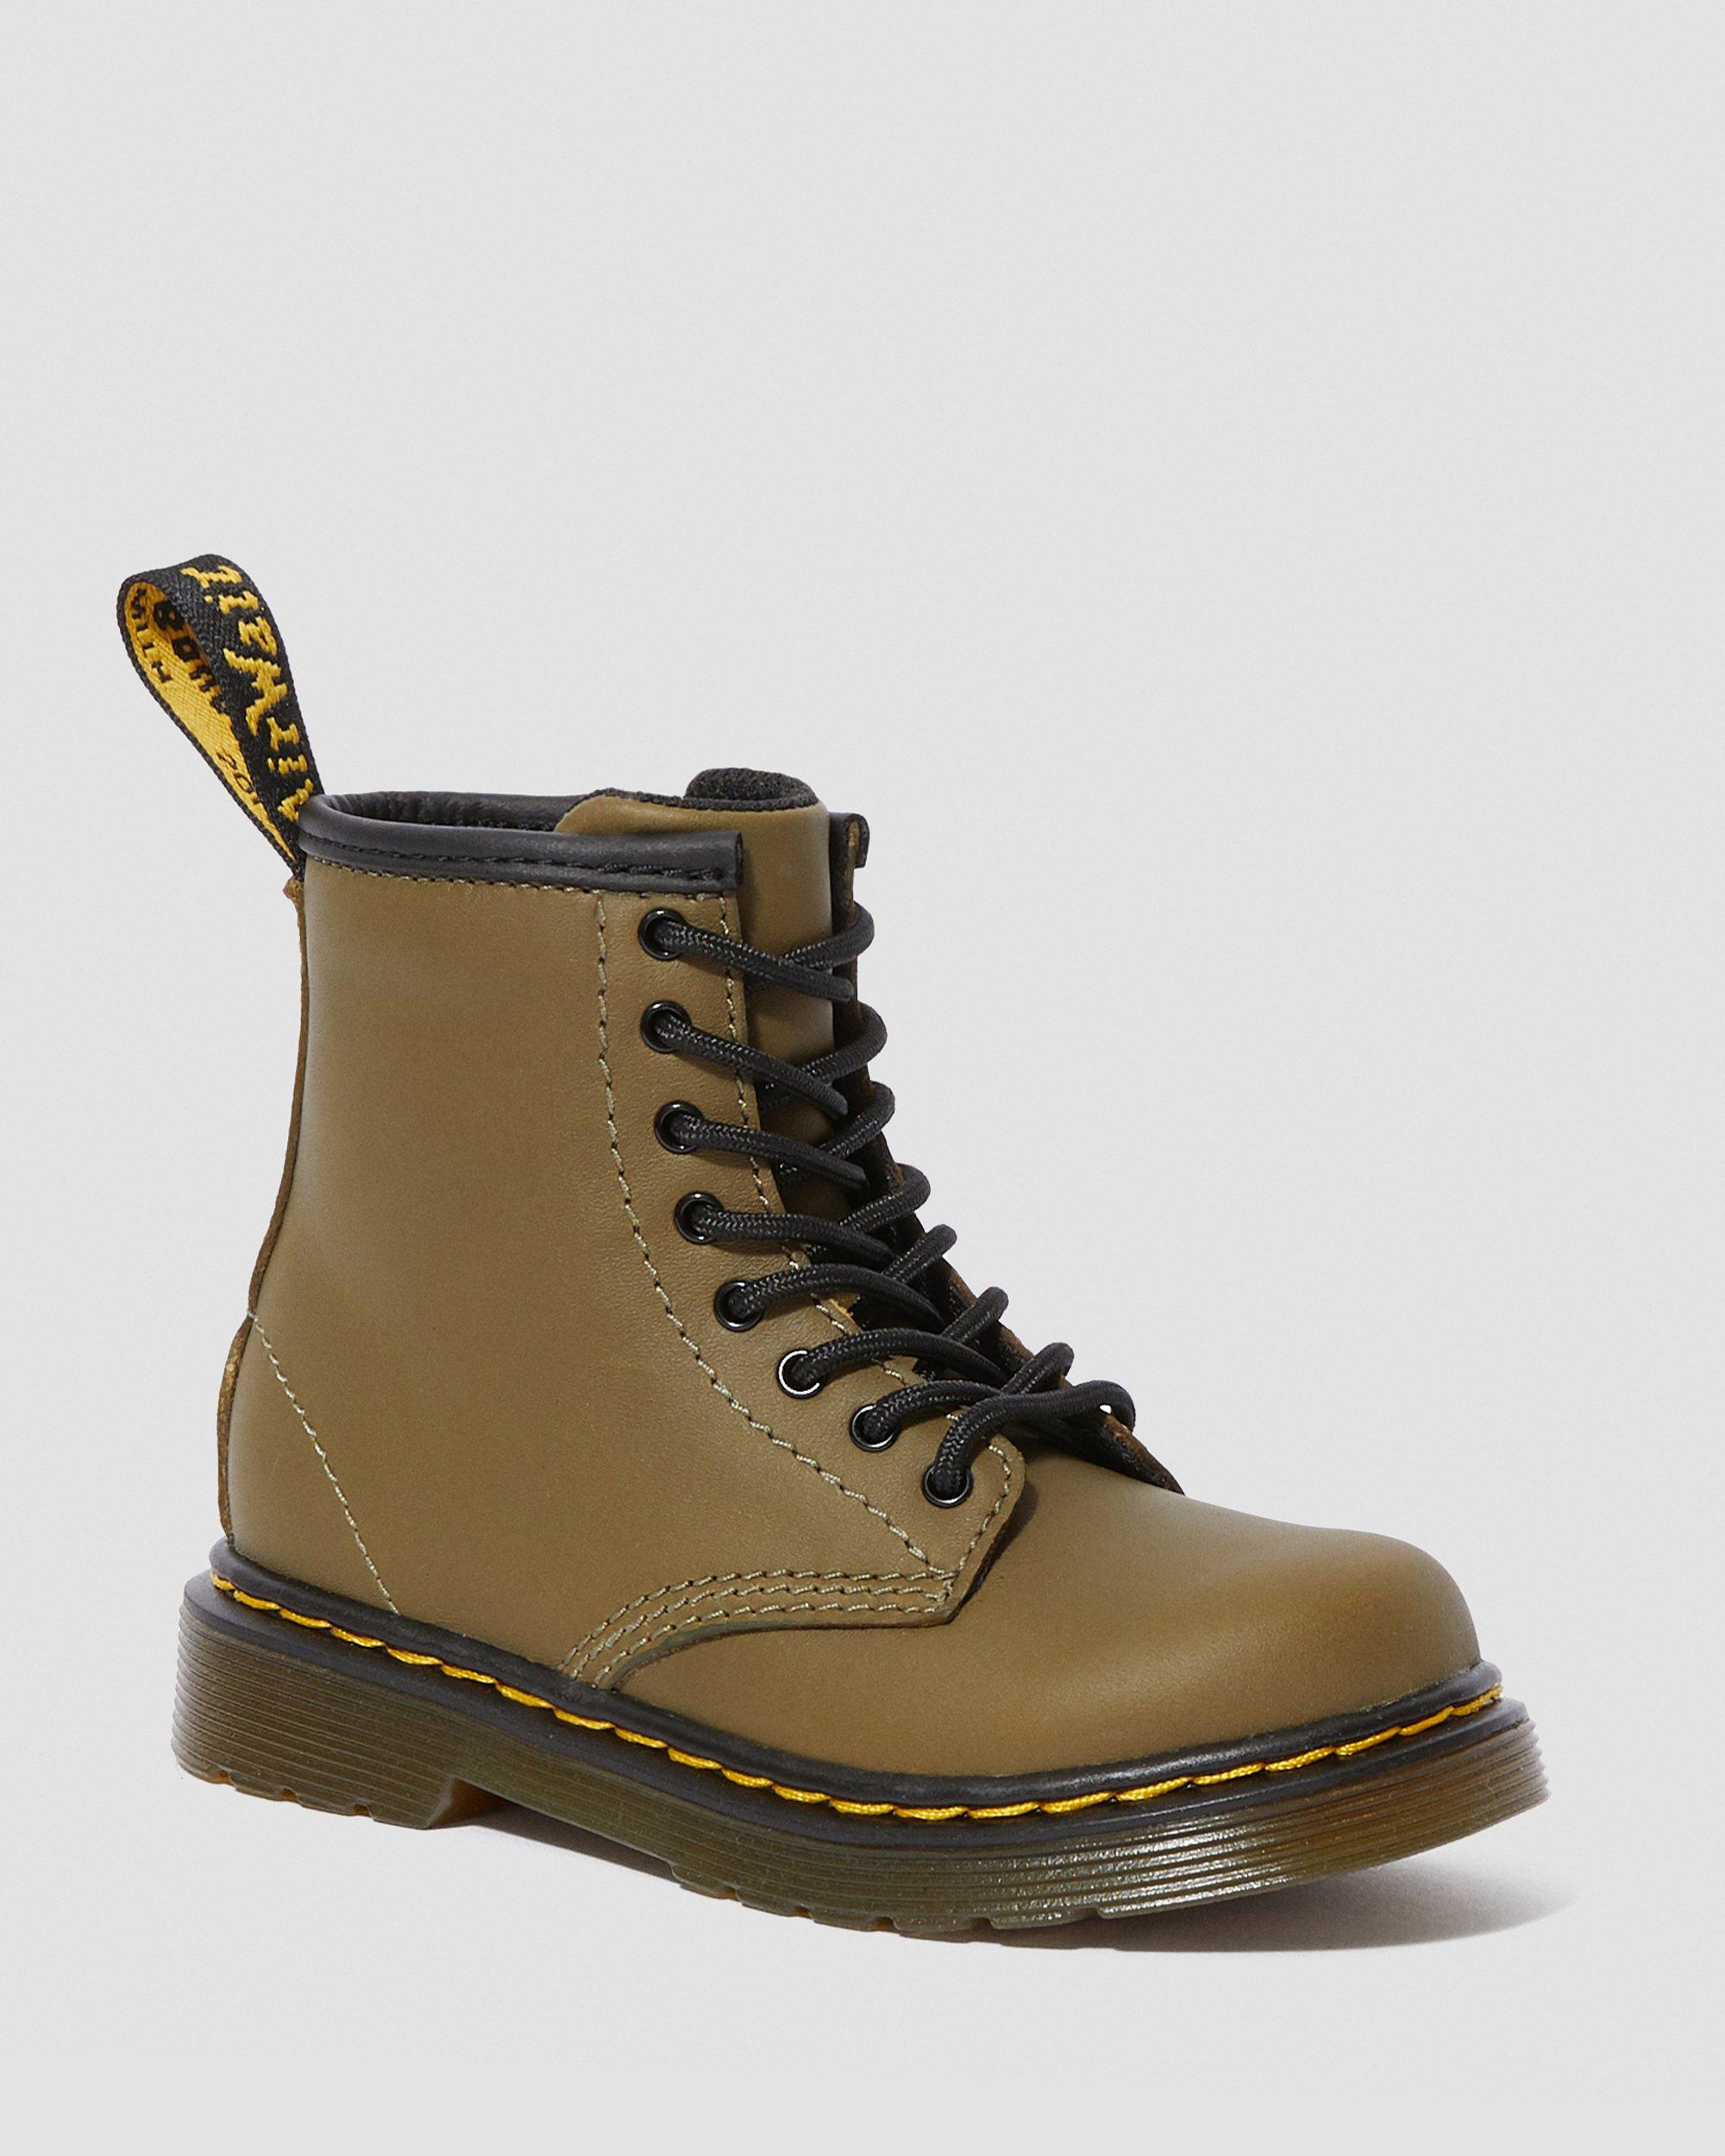 Toddler 1460 Leather Lace Up Boots in Yellow